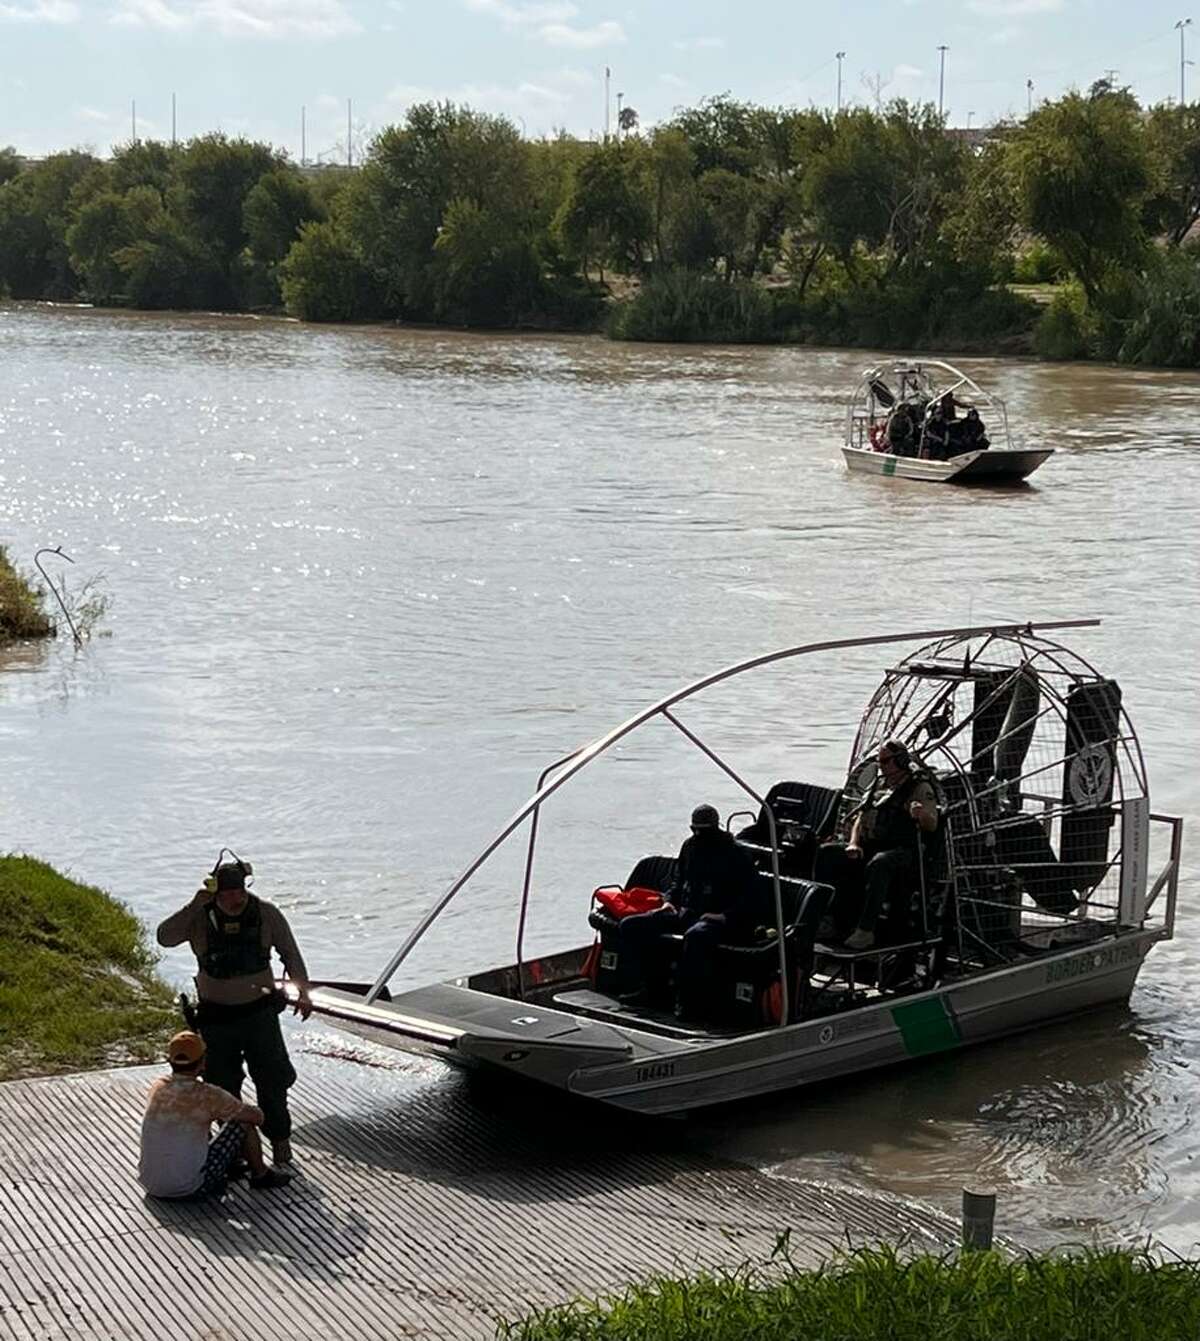 U.S. Border Patrol agents rescued a migrant who was struggling to stay afloat in the Rio Grande. He was determined to be from Venezuela and was processed accordingly.